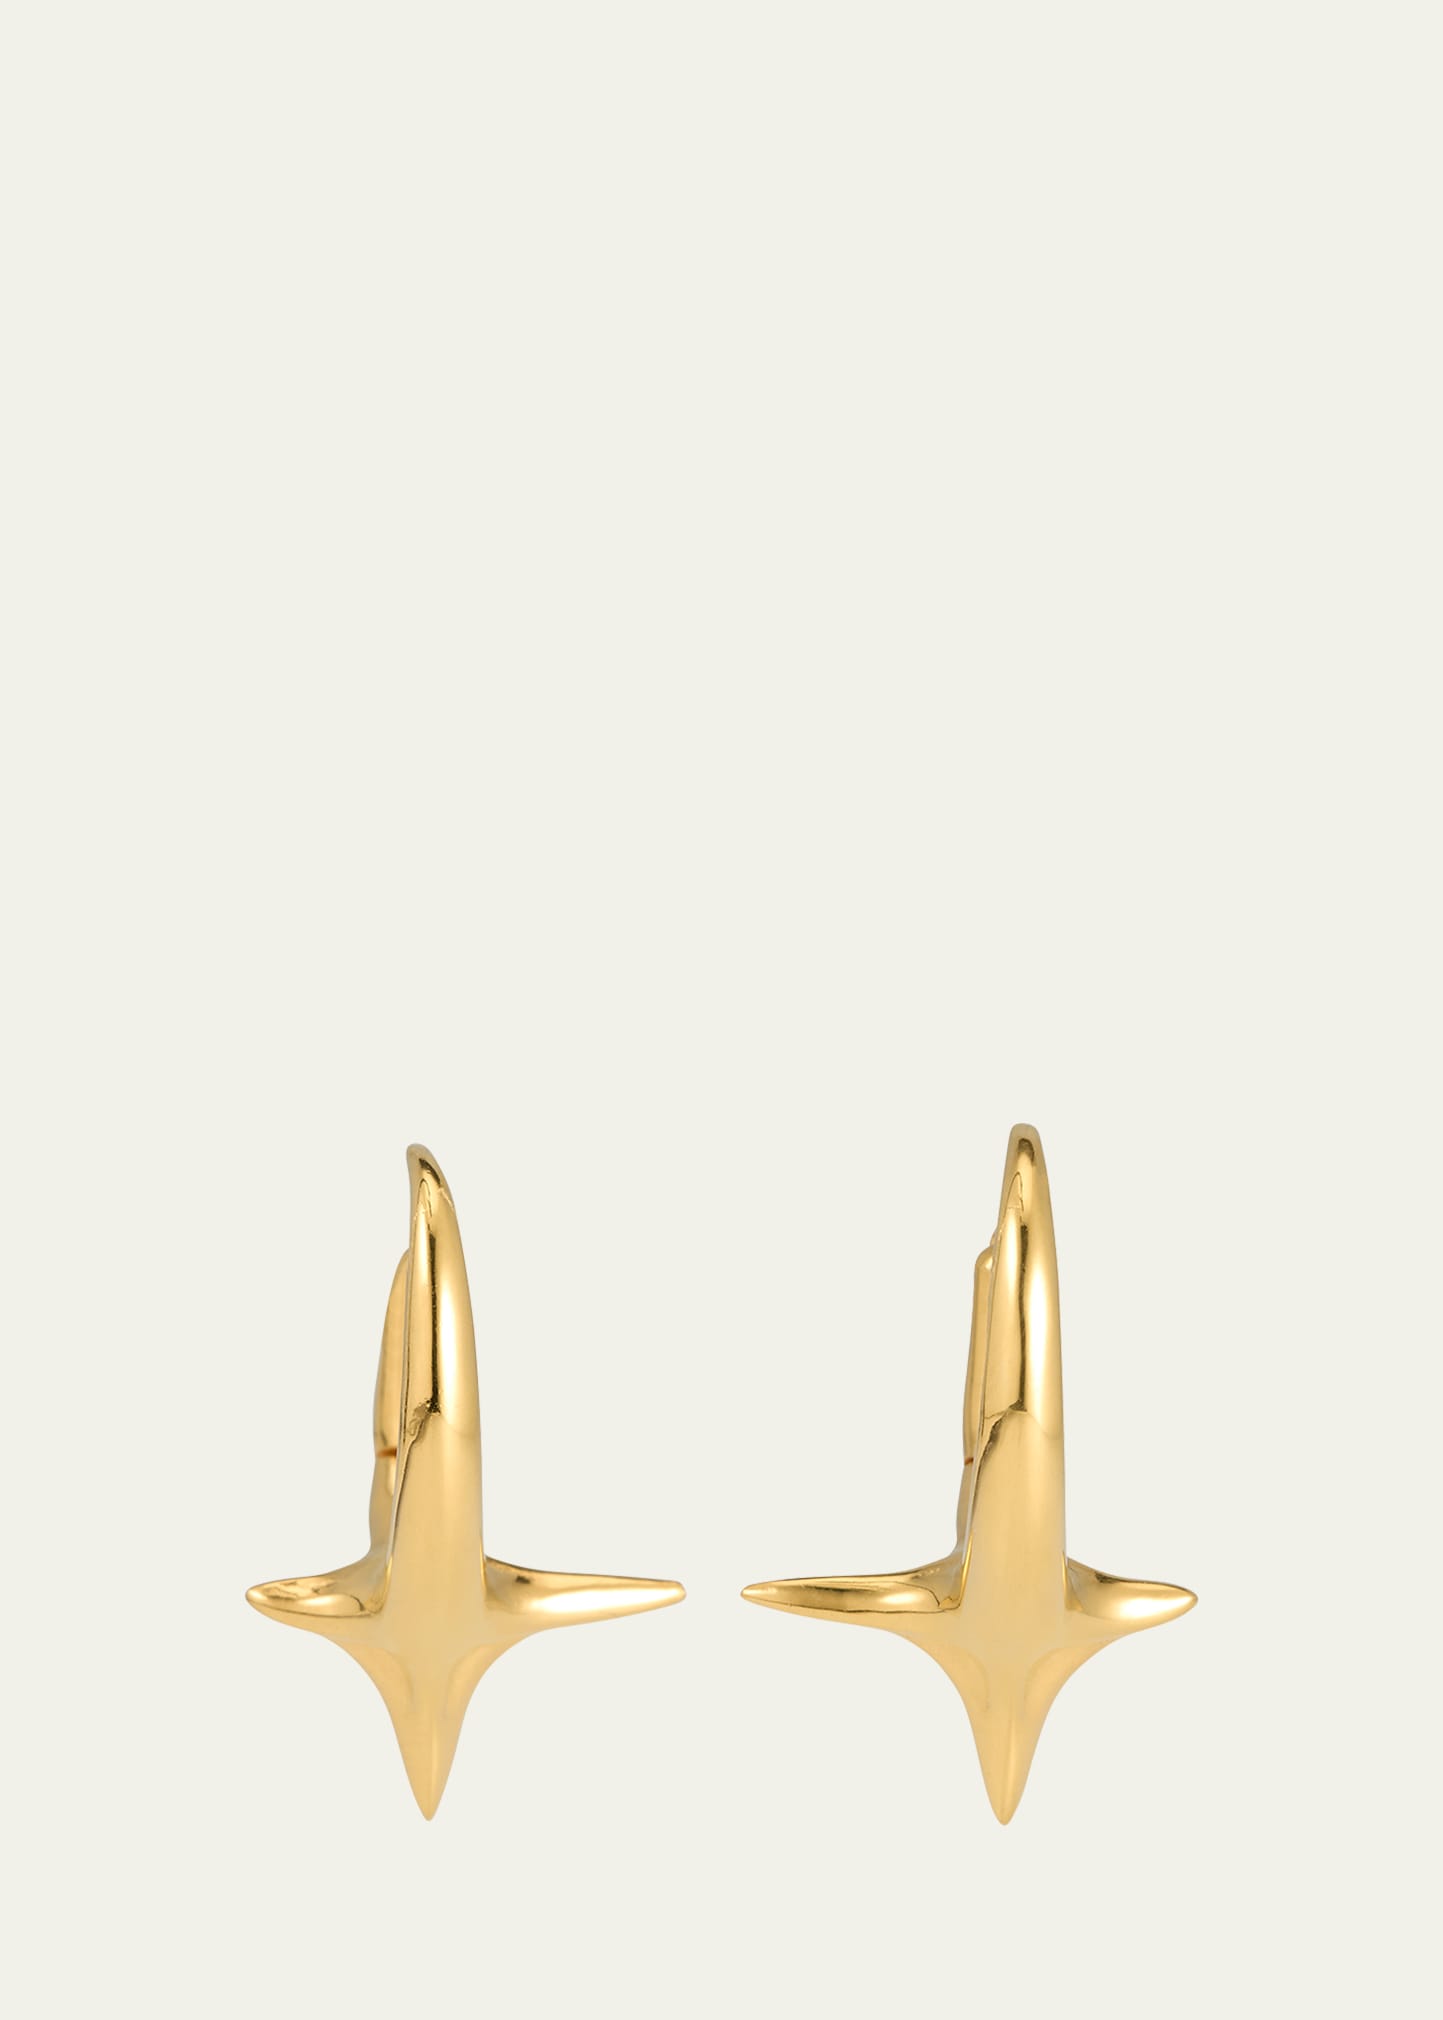 KHIRY SOLO SPIKED HOOP EARRINGS IN POLISHED 18K YELLOW GOLD VERMEIL